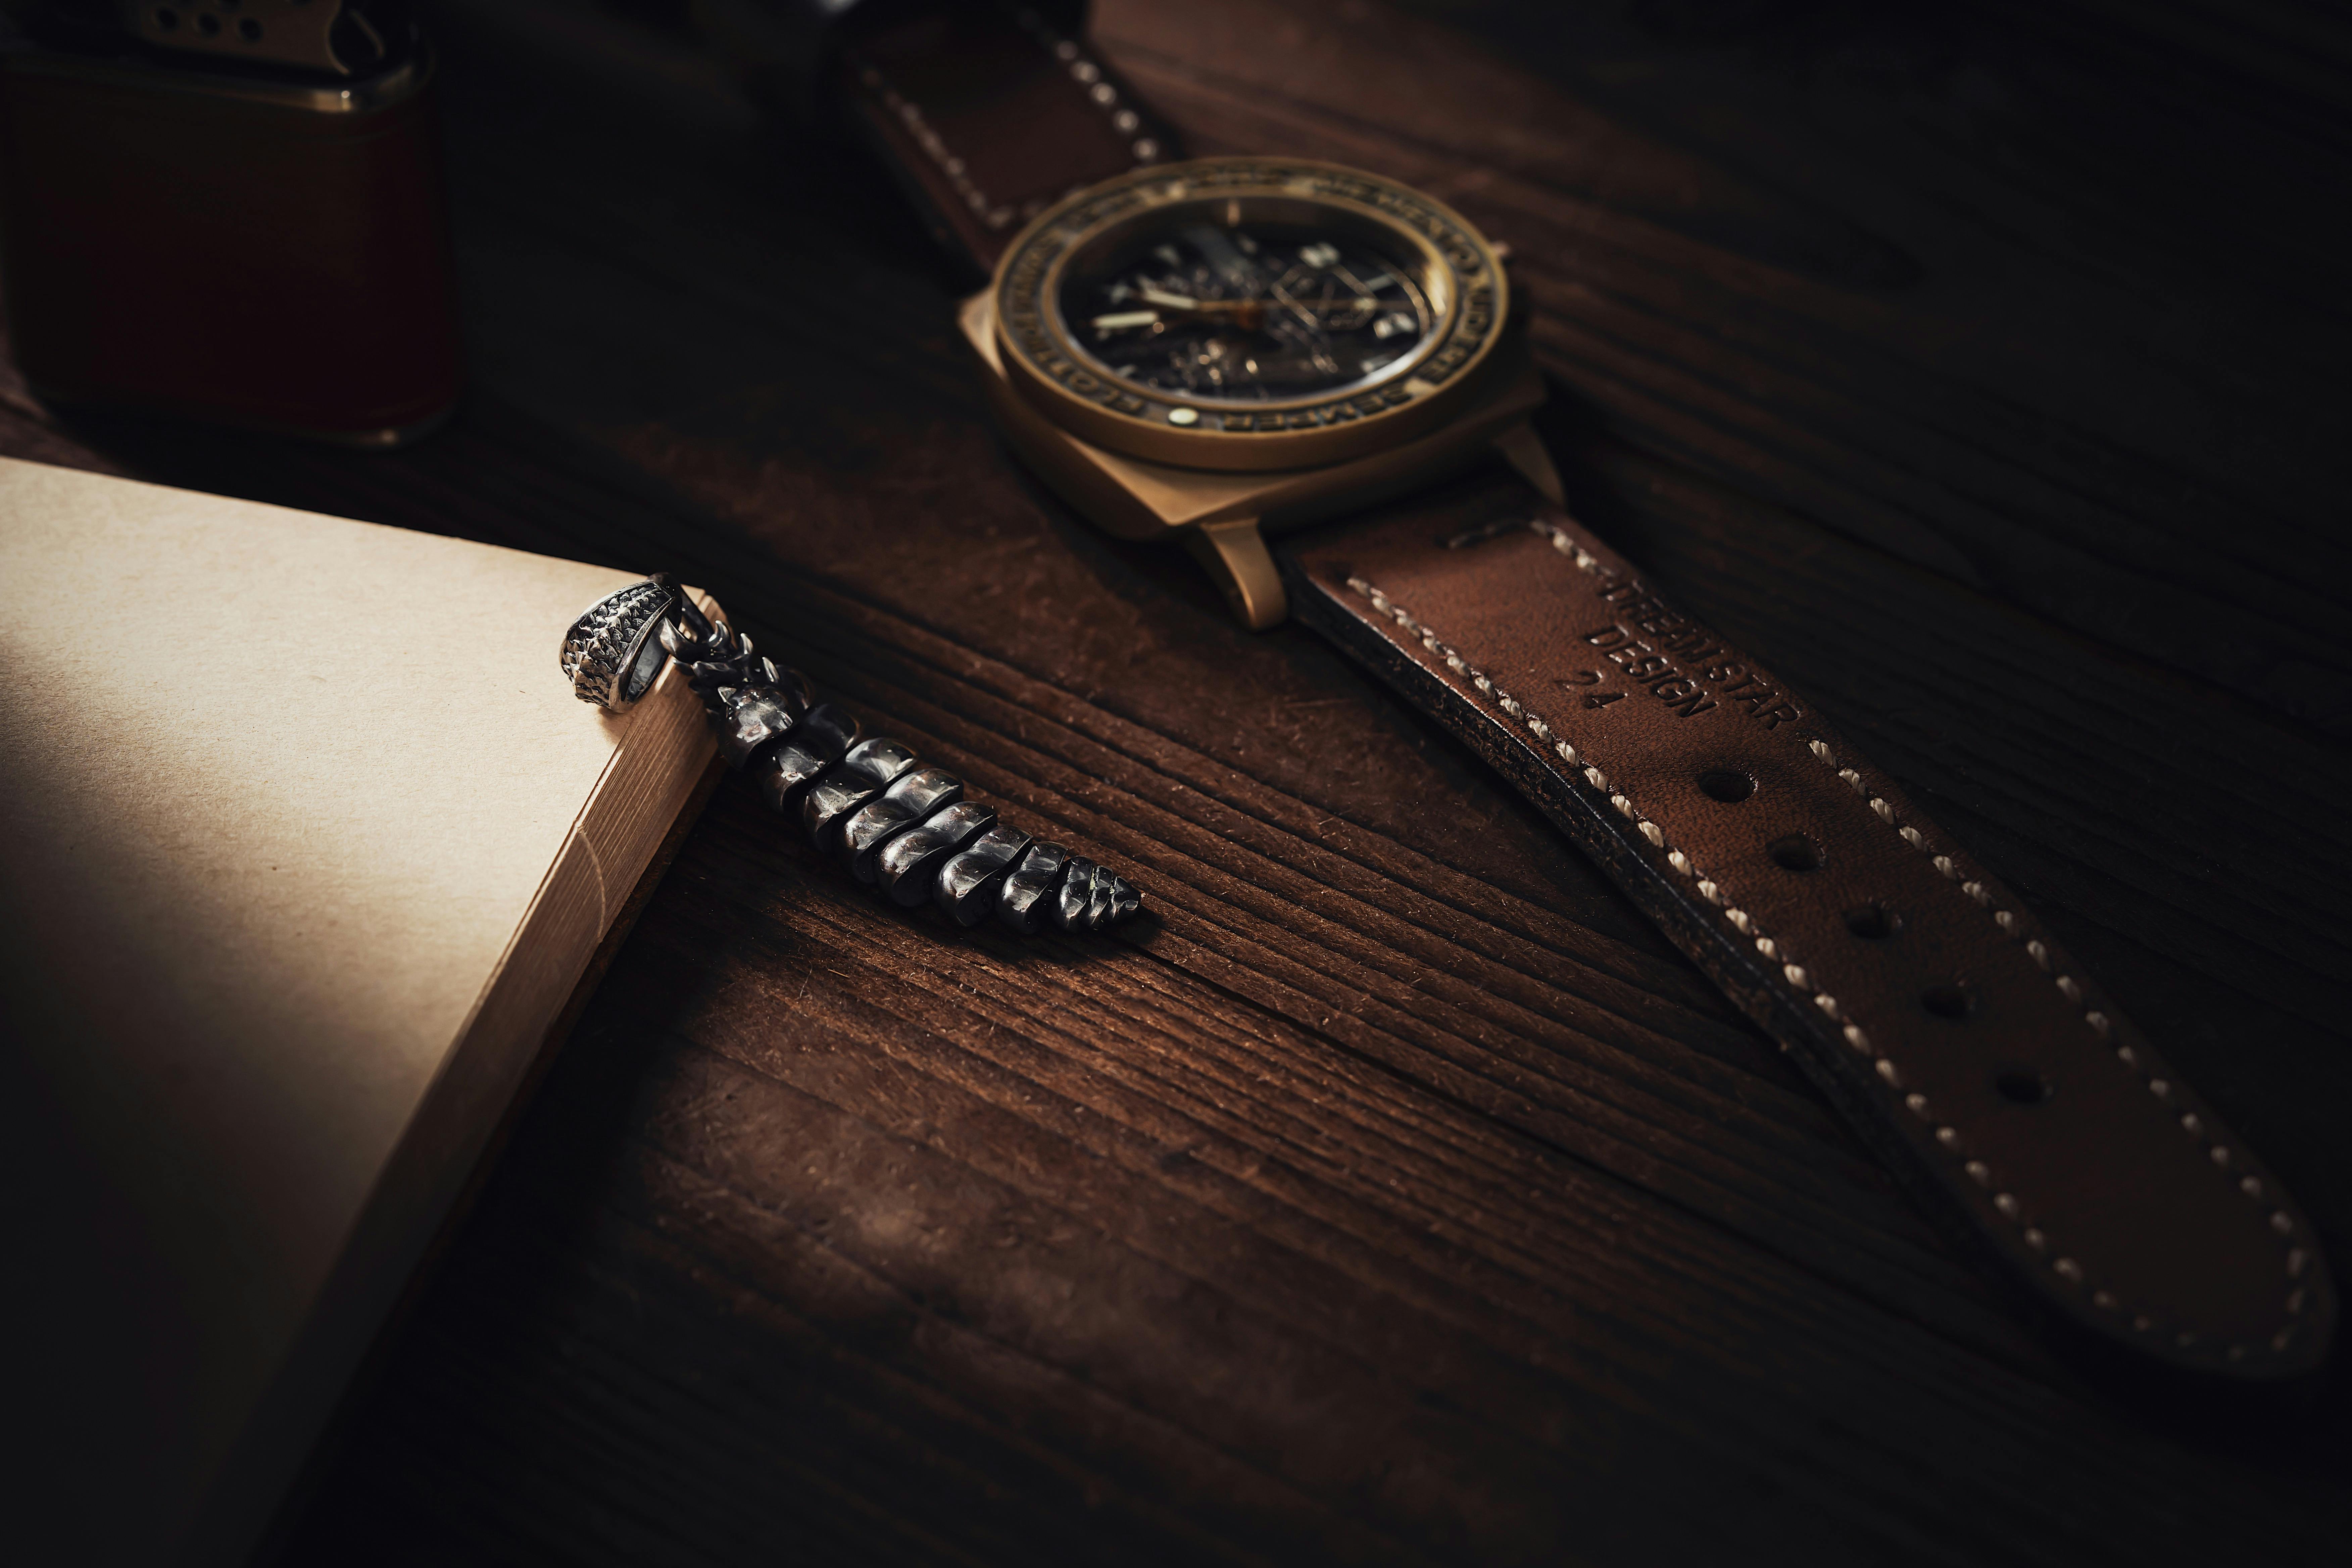 What Are Some Key Factors To Consider When Investing In A Luxury Watch?